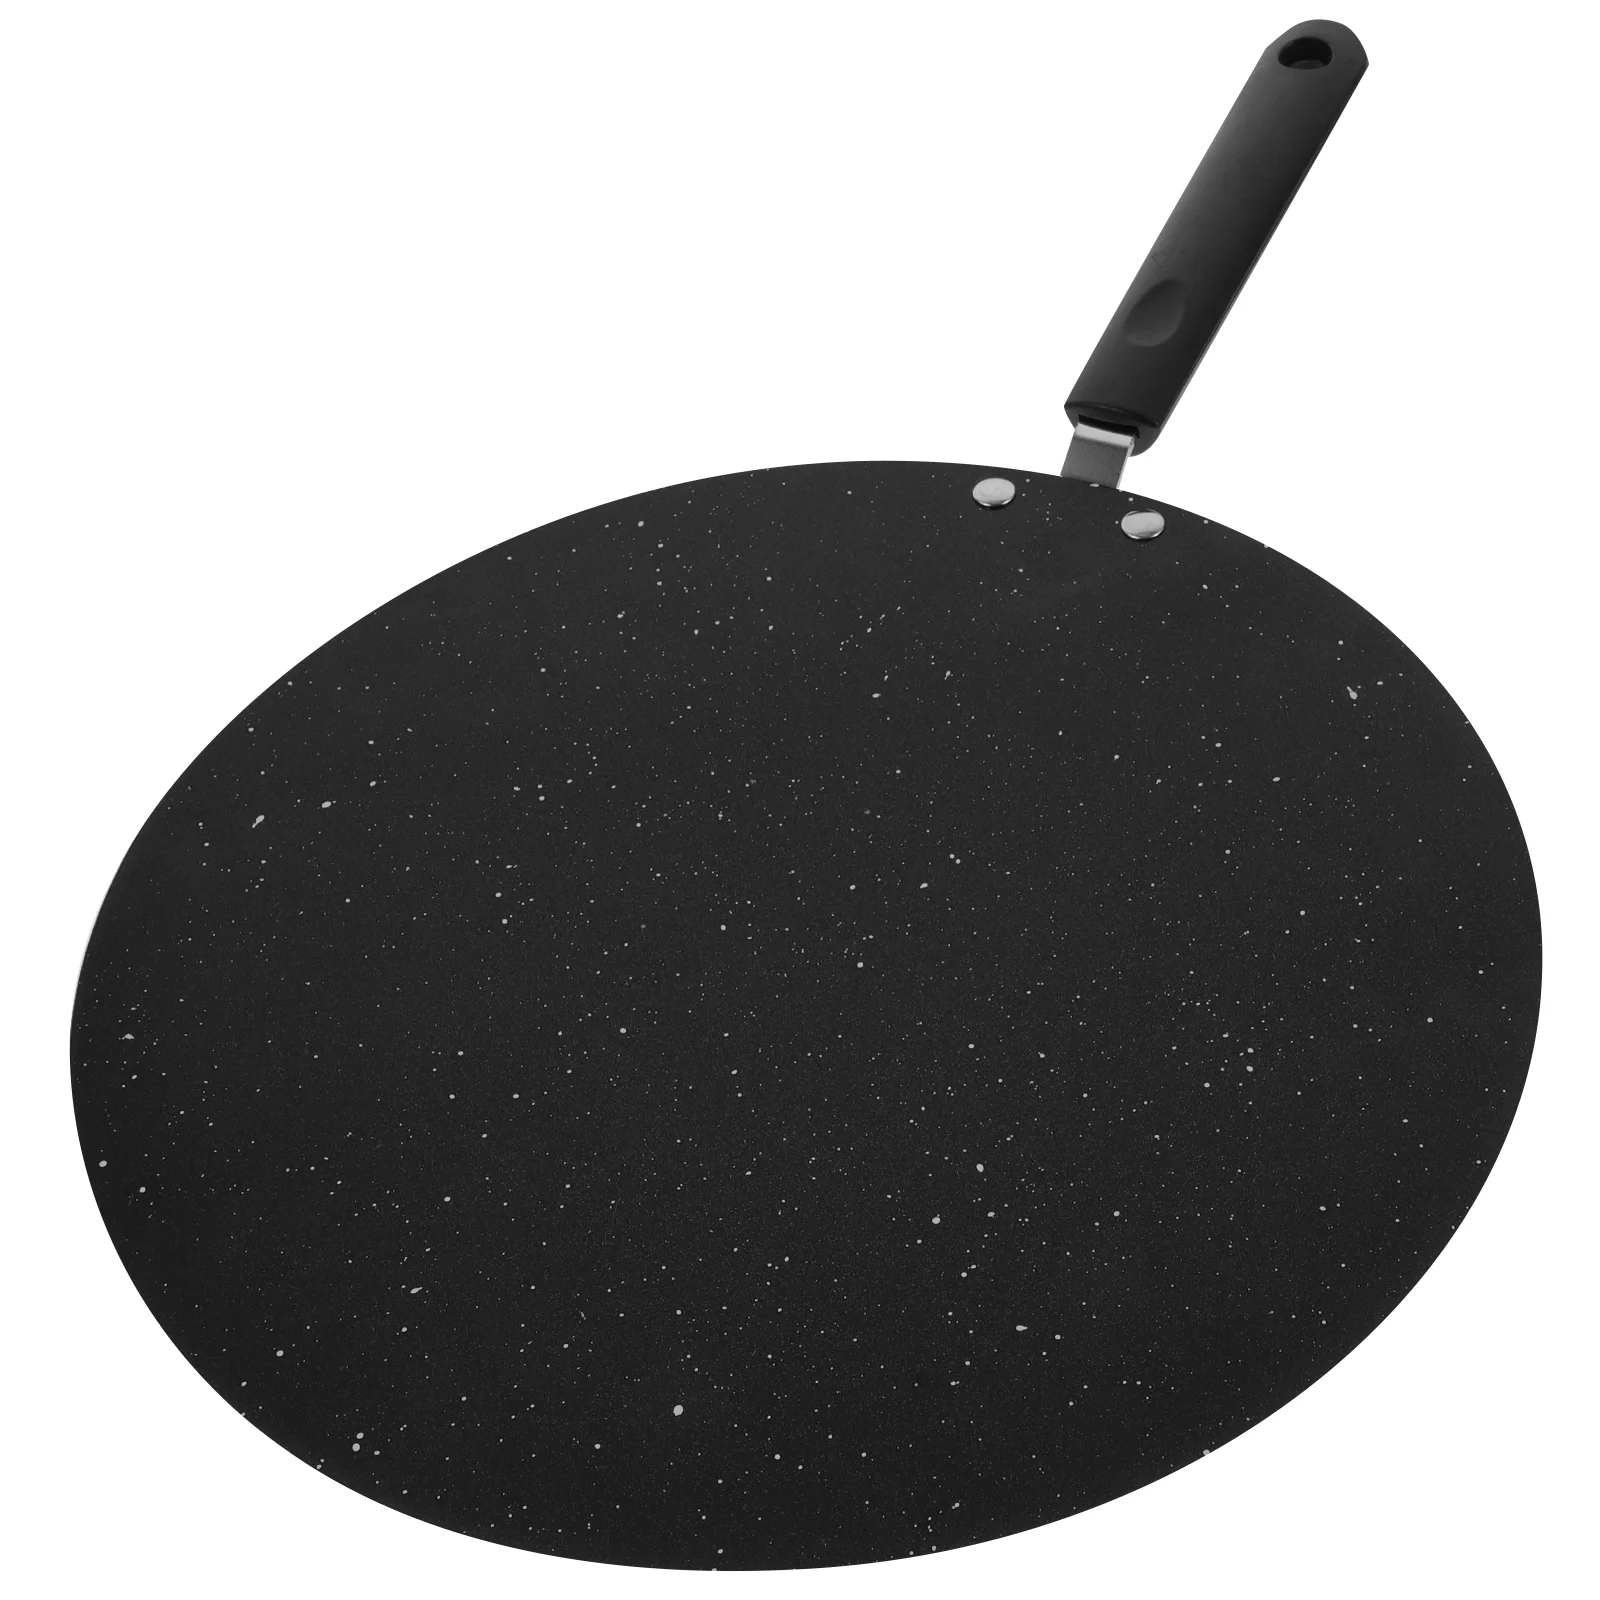 

Frying Pan Omlettee Griddle Skillet Pans Portable Omlete Flat Nonstick Fried Bbq Grilling Household Baking Tray